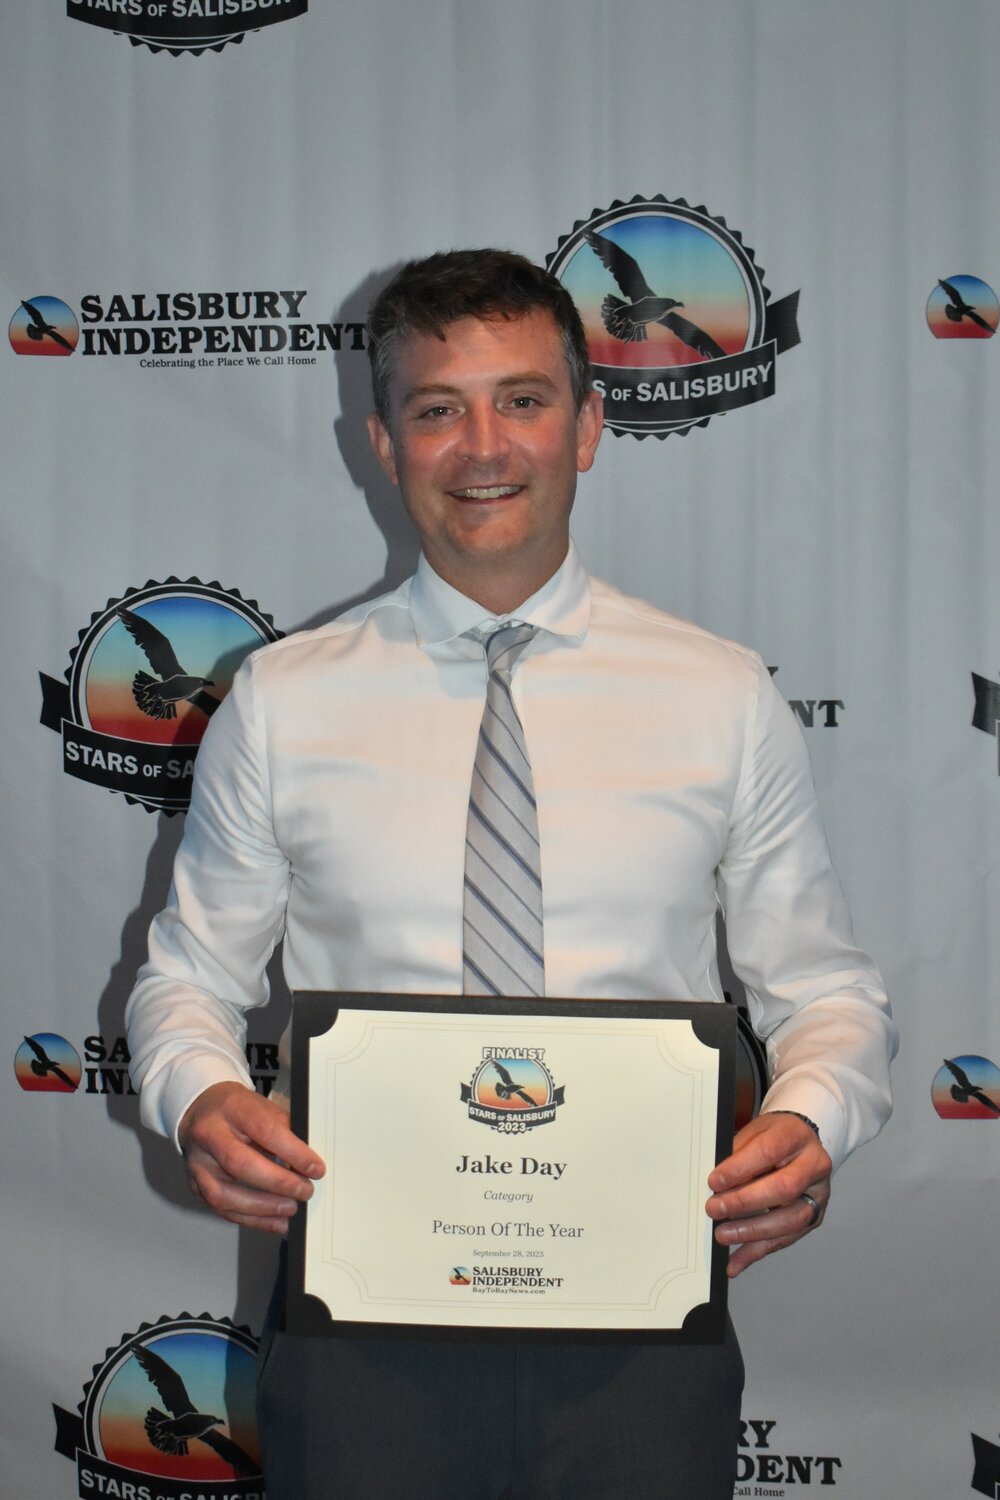 City administrator Andy Kitzrow collects the certificate on behalf of Person of the Year finalist Jacob “Jake” Day at Stars of Salisbury 2023.